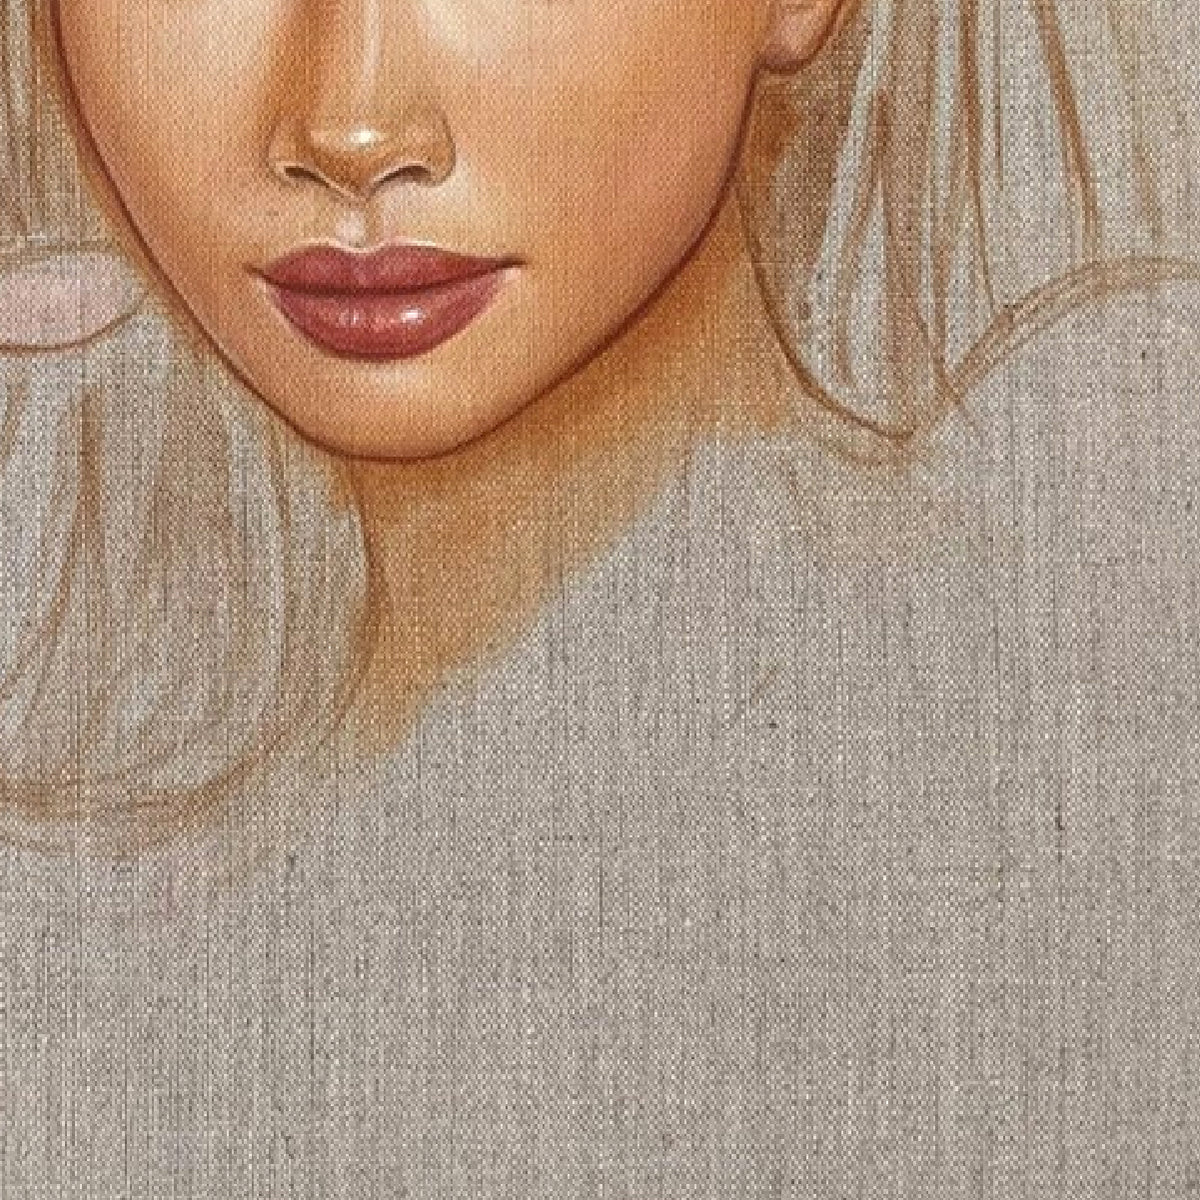 cropped painting of a woman with honey colored eyes holding her hand to her face